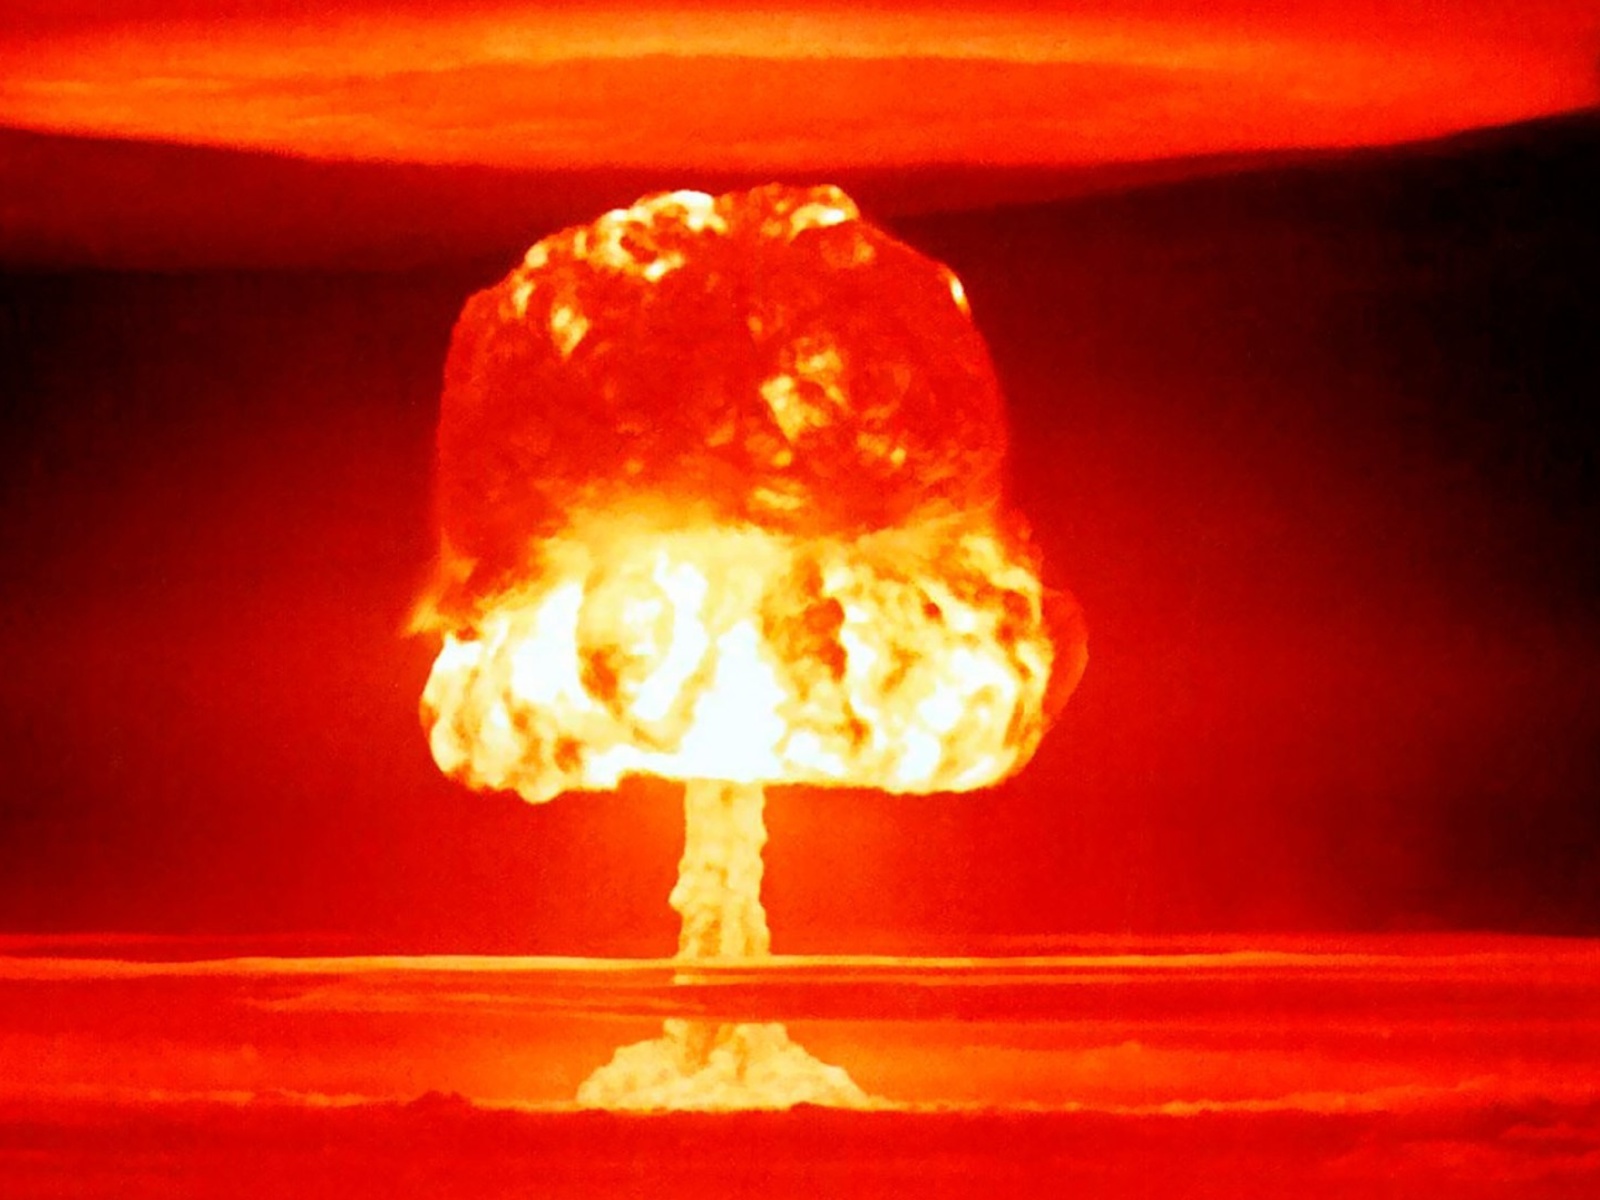 Nuclear explosion wallpaper 1600x1200